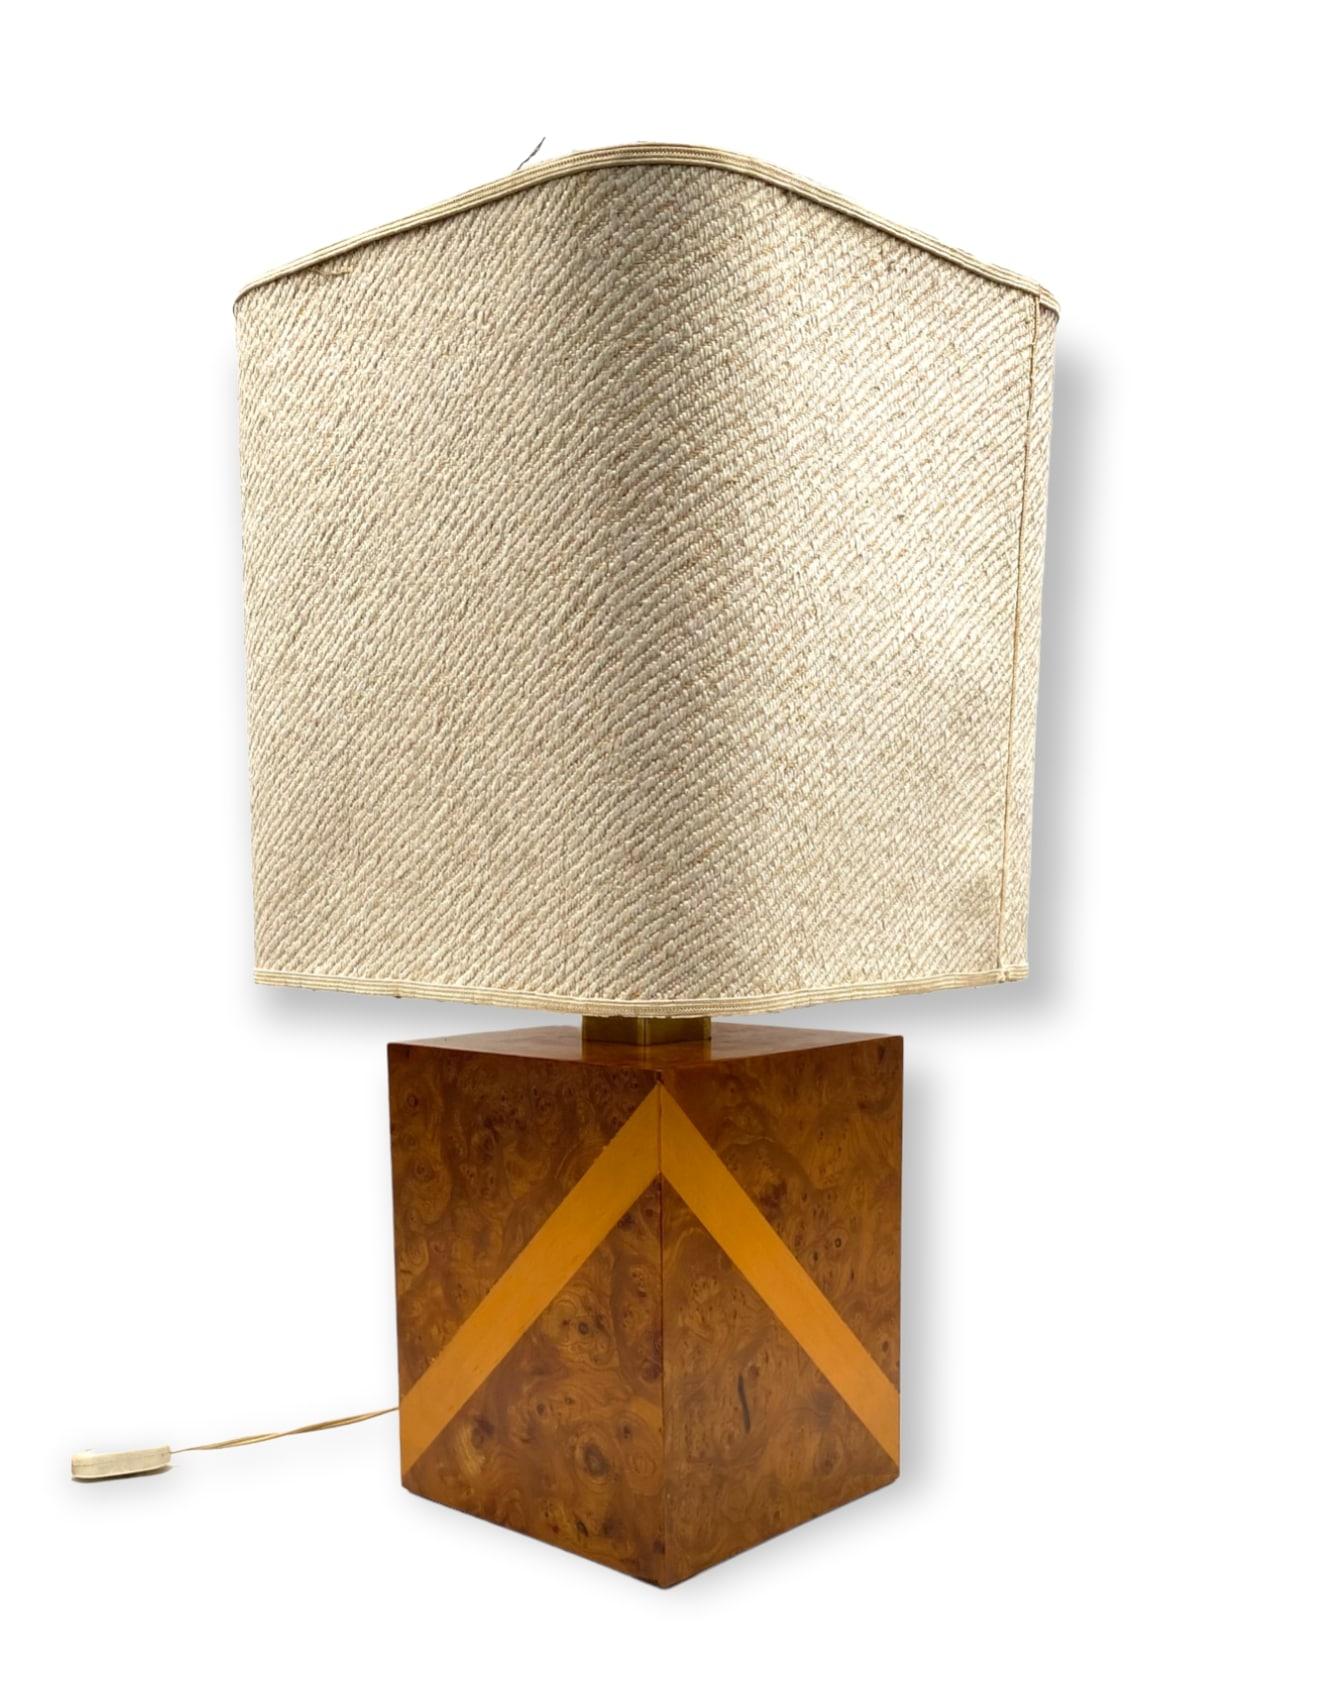 Hollywood Regency Cubic Wood and Brass Table Lamp, Italy, 1970s For Sale 8